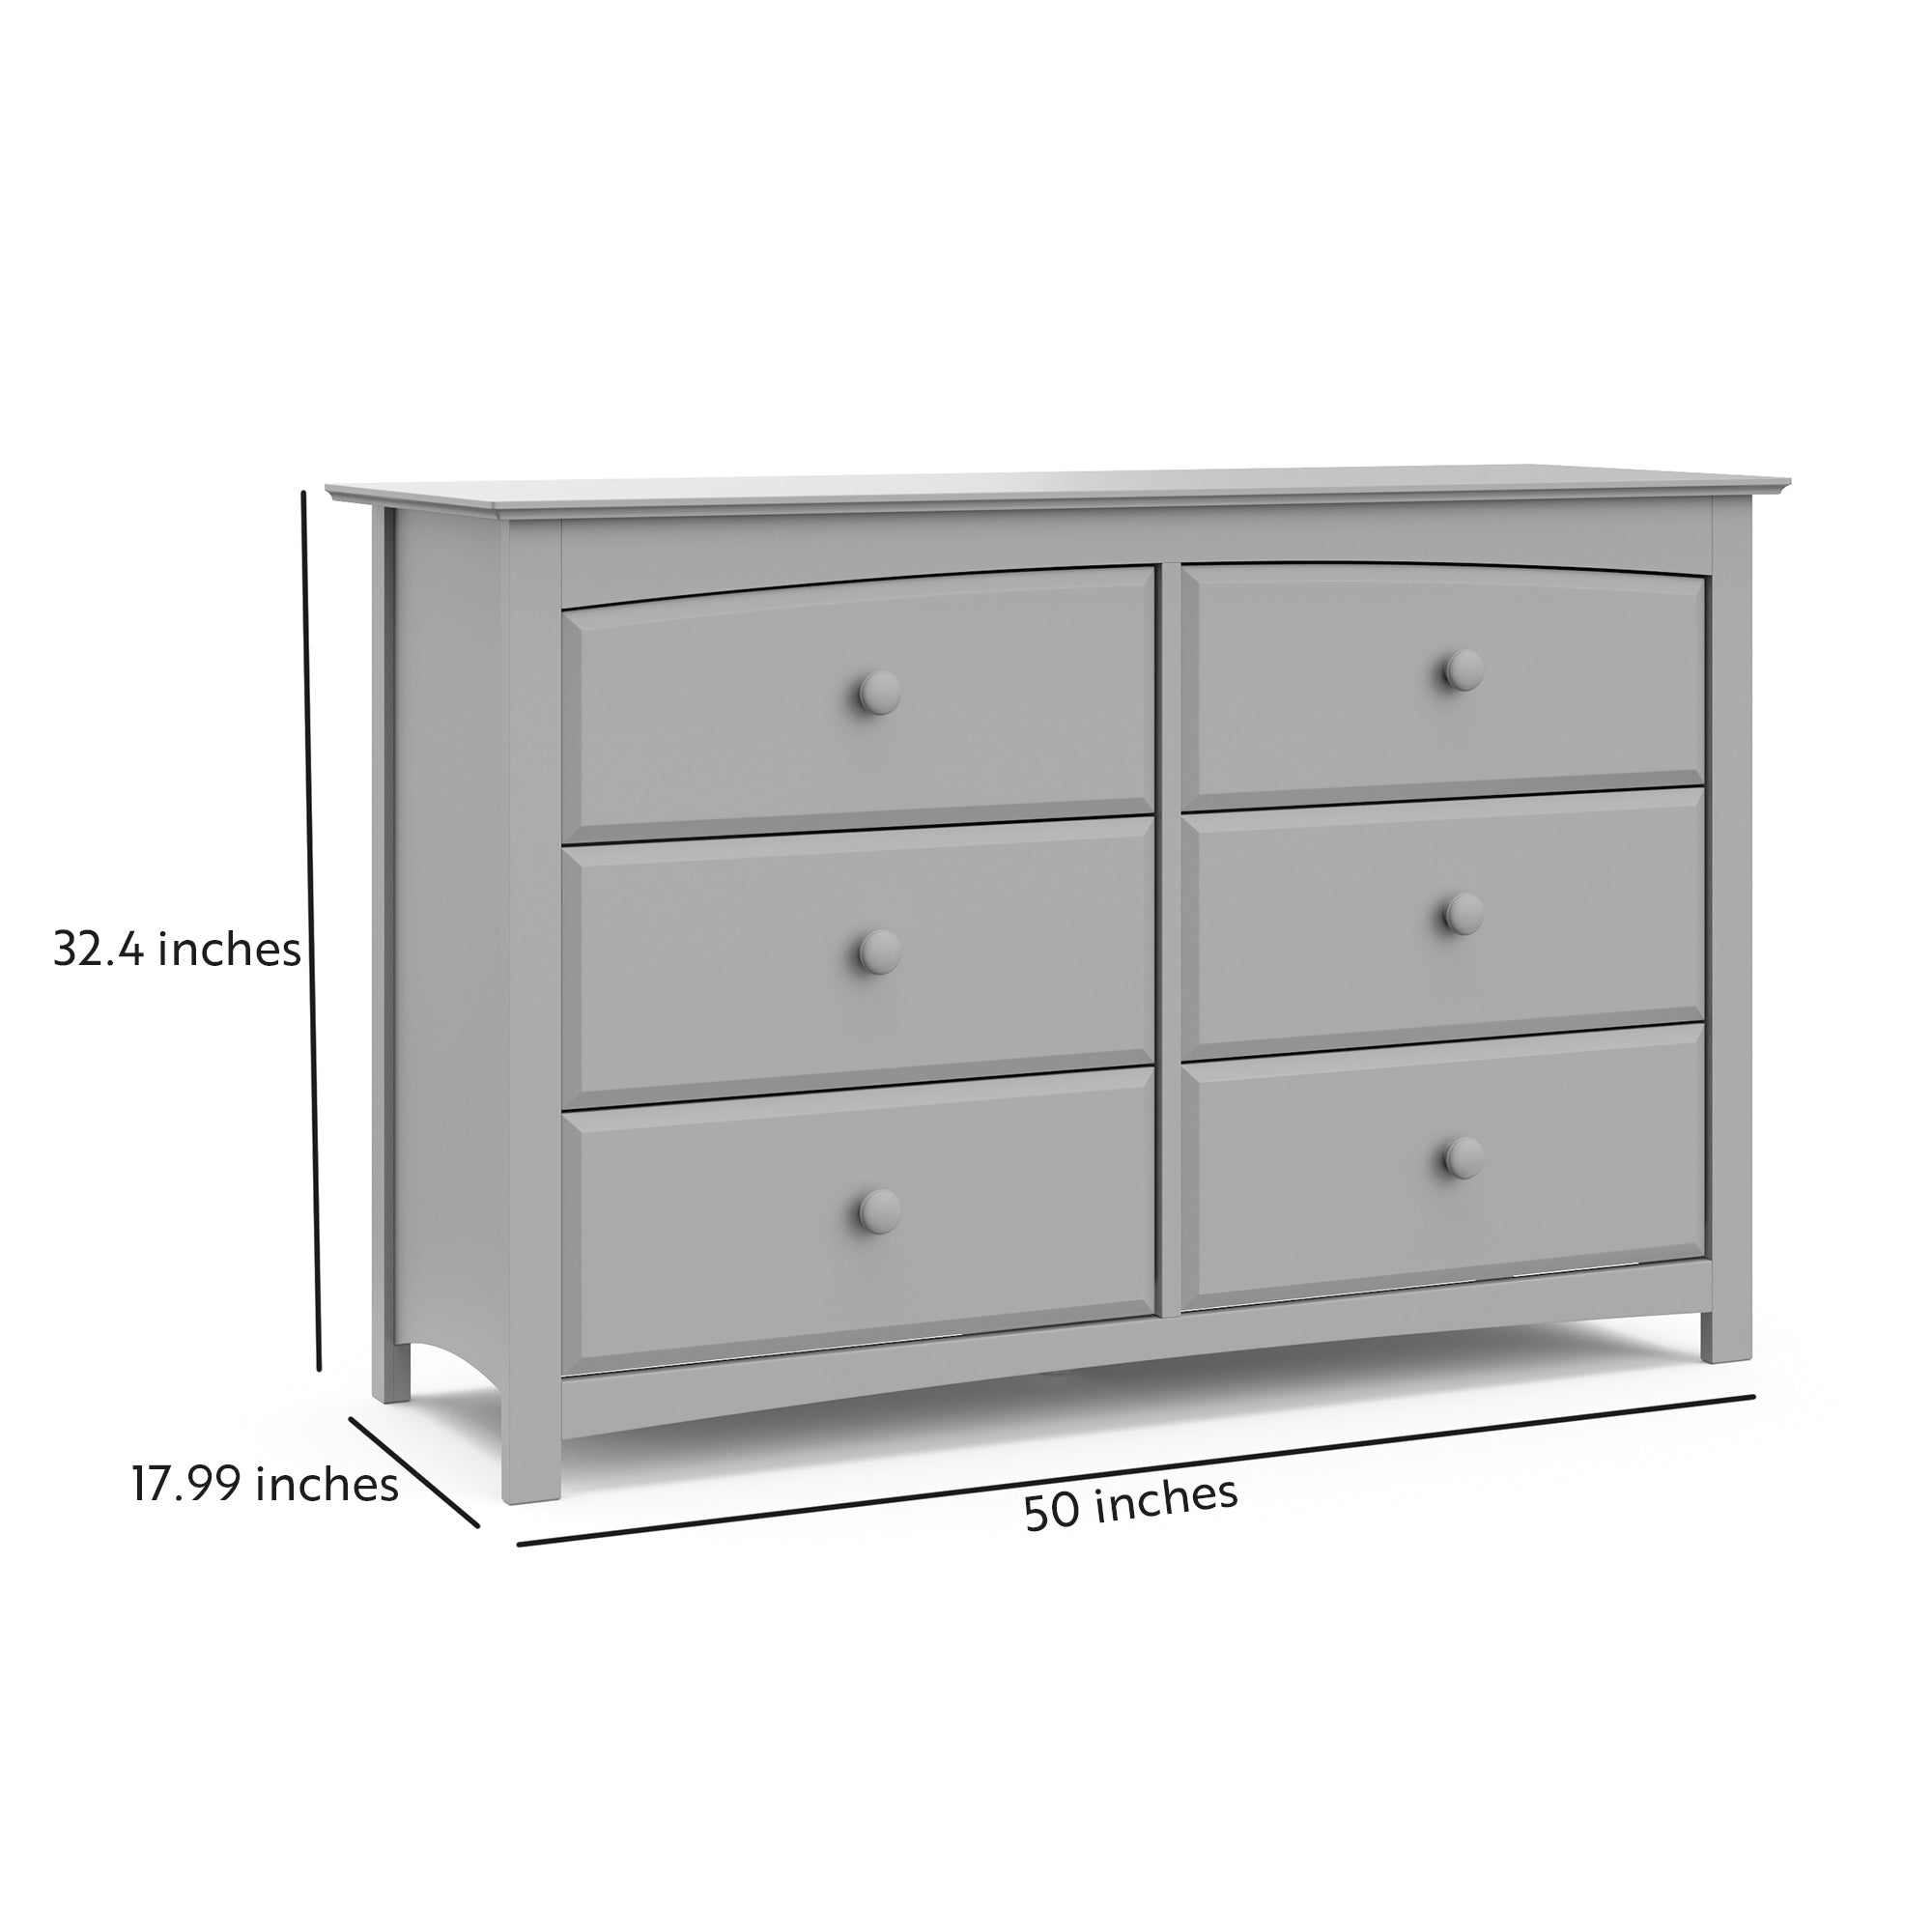 Pebble gray 6 drawer dresser with dimensions